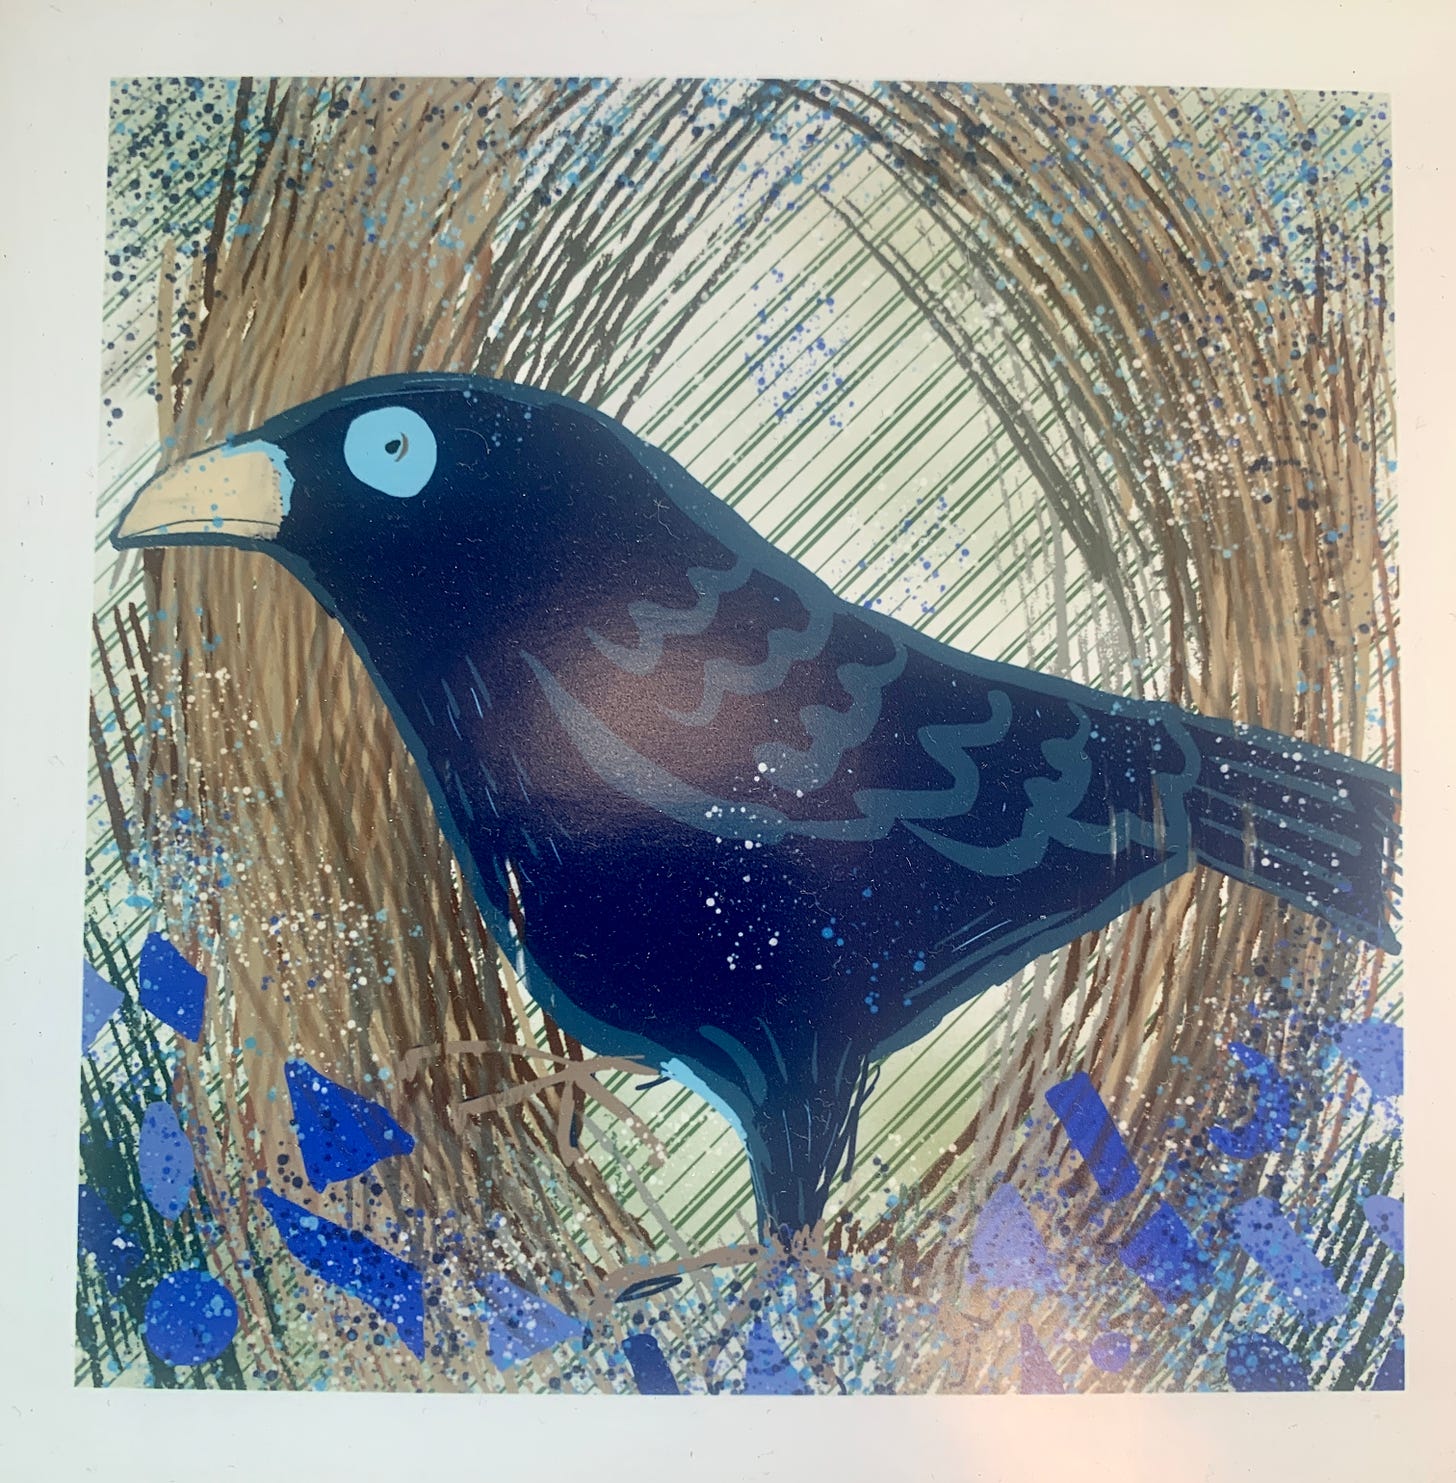 An image of the bowerbird in his bower, created by Isla Flood.